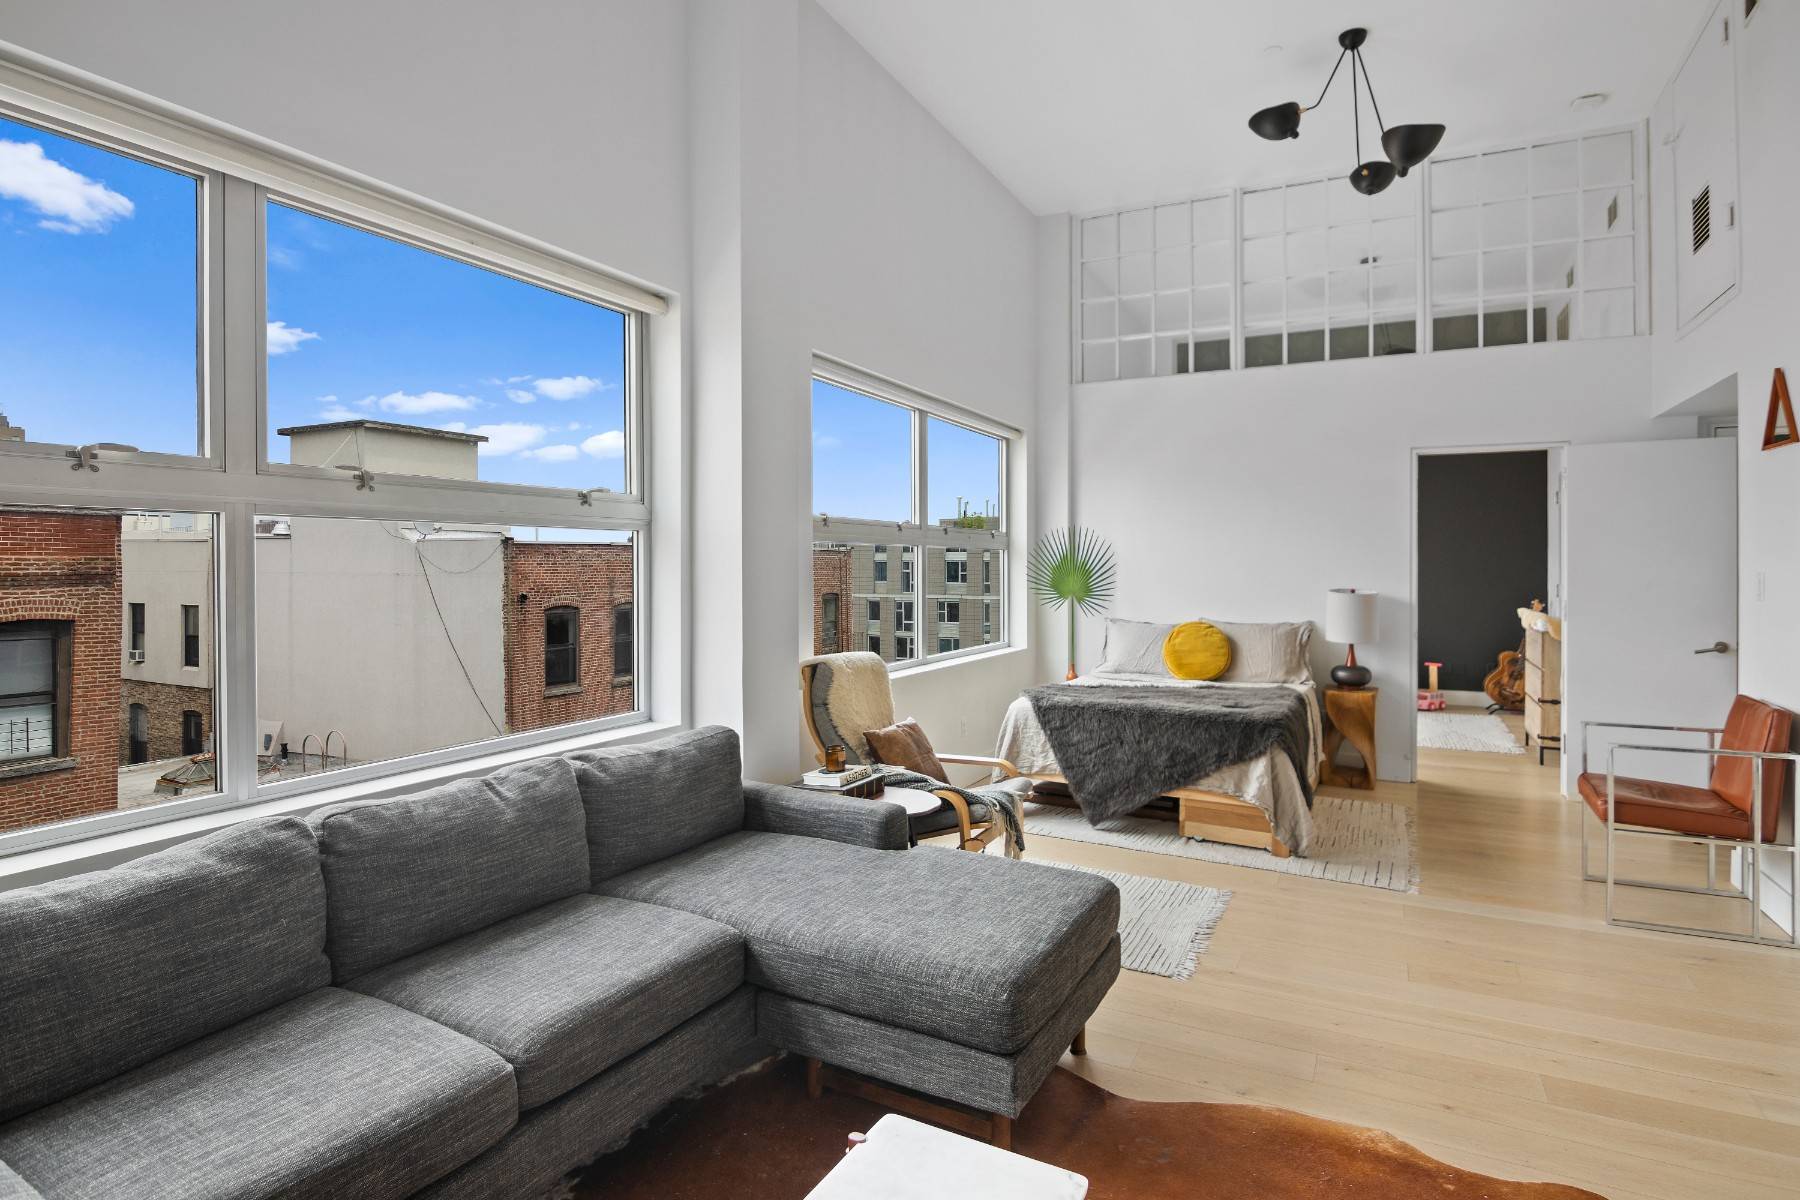 When you step into 4F at 100 N 3rd St, you'll know you've found the perfect home.